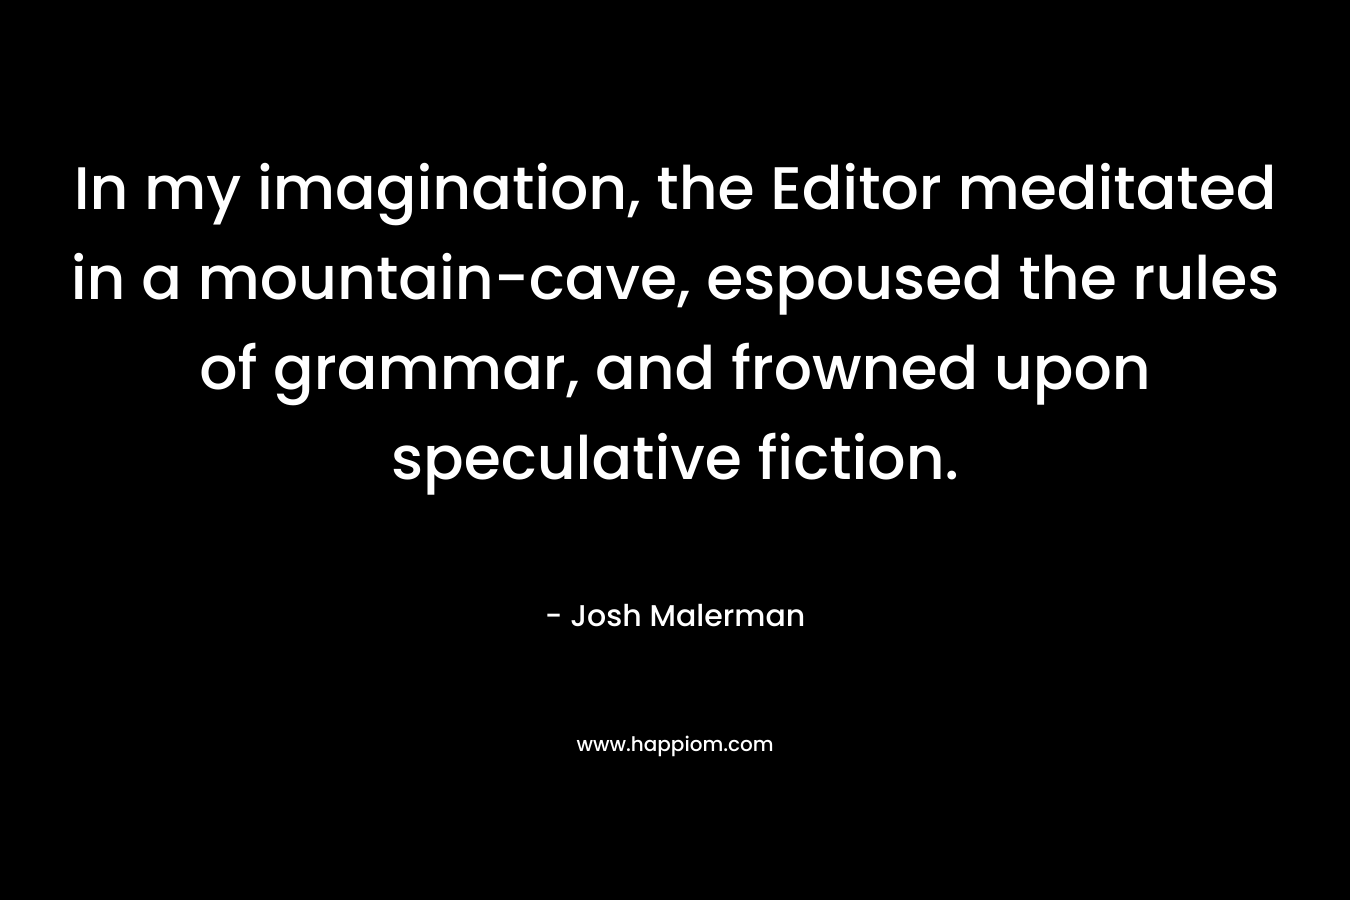 In my imagination, the Editor meditated in a mountain-cave, espoused the rules of grammar, and frowned upon speculative fiction. – Josh Malerman